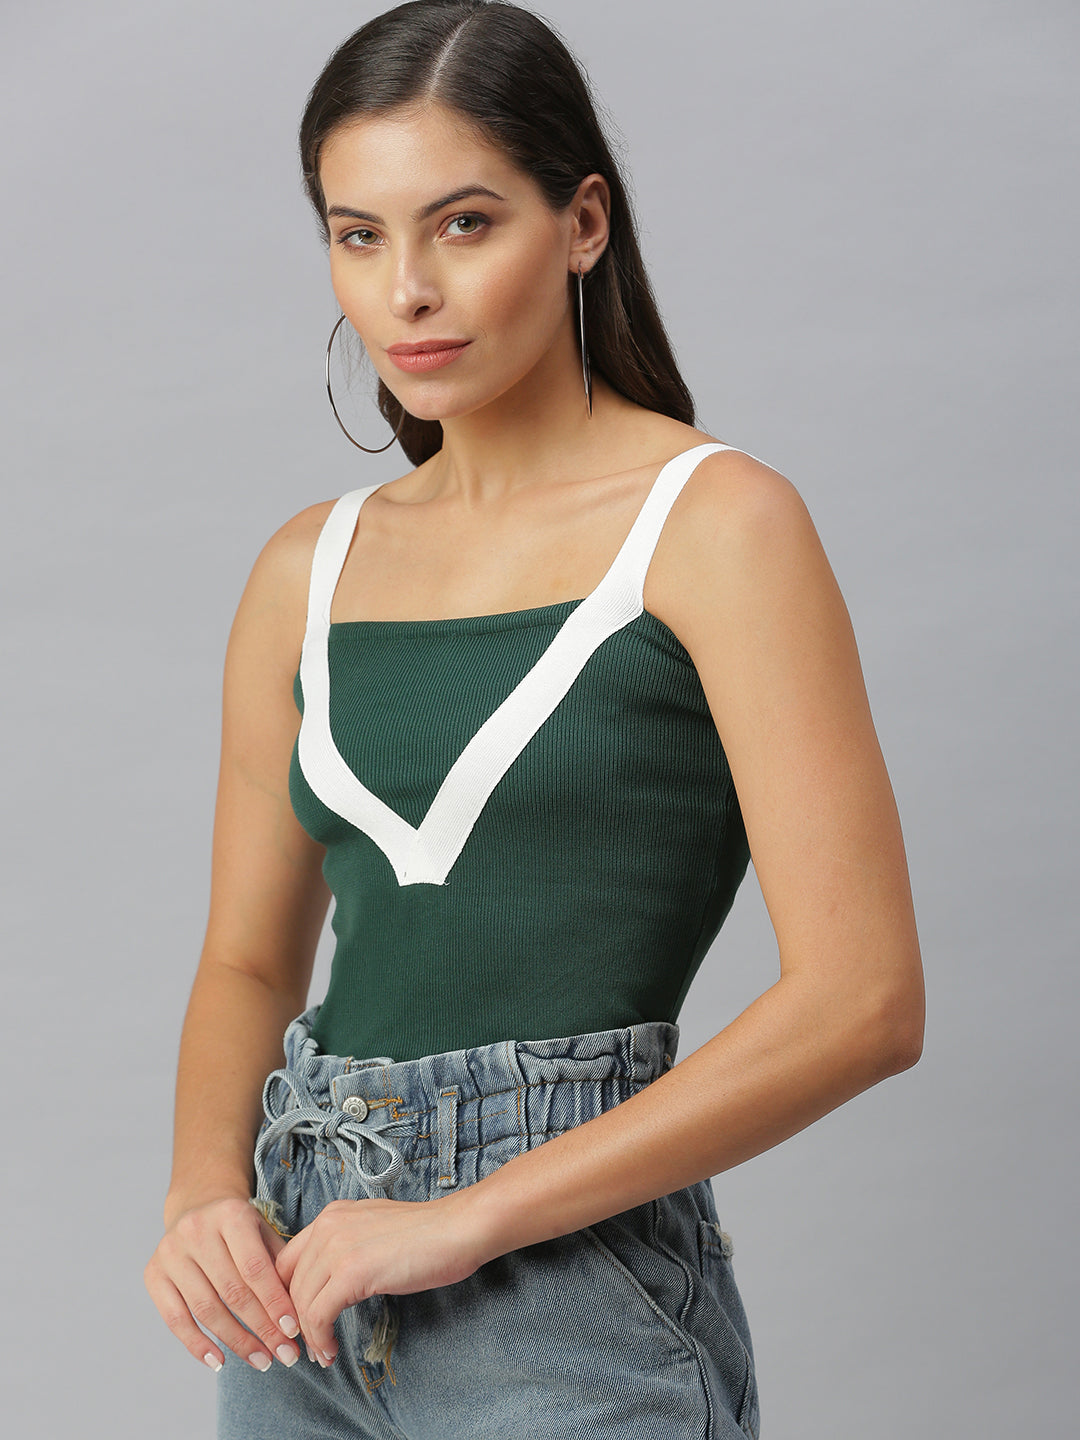 Women Shoulder Straps Solid Green Fitted Top